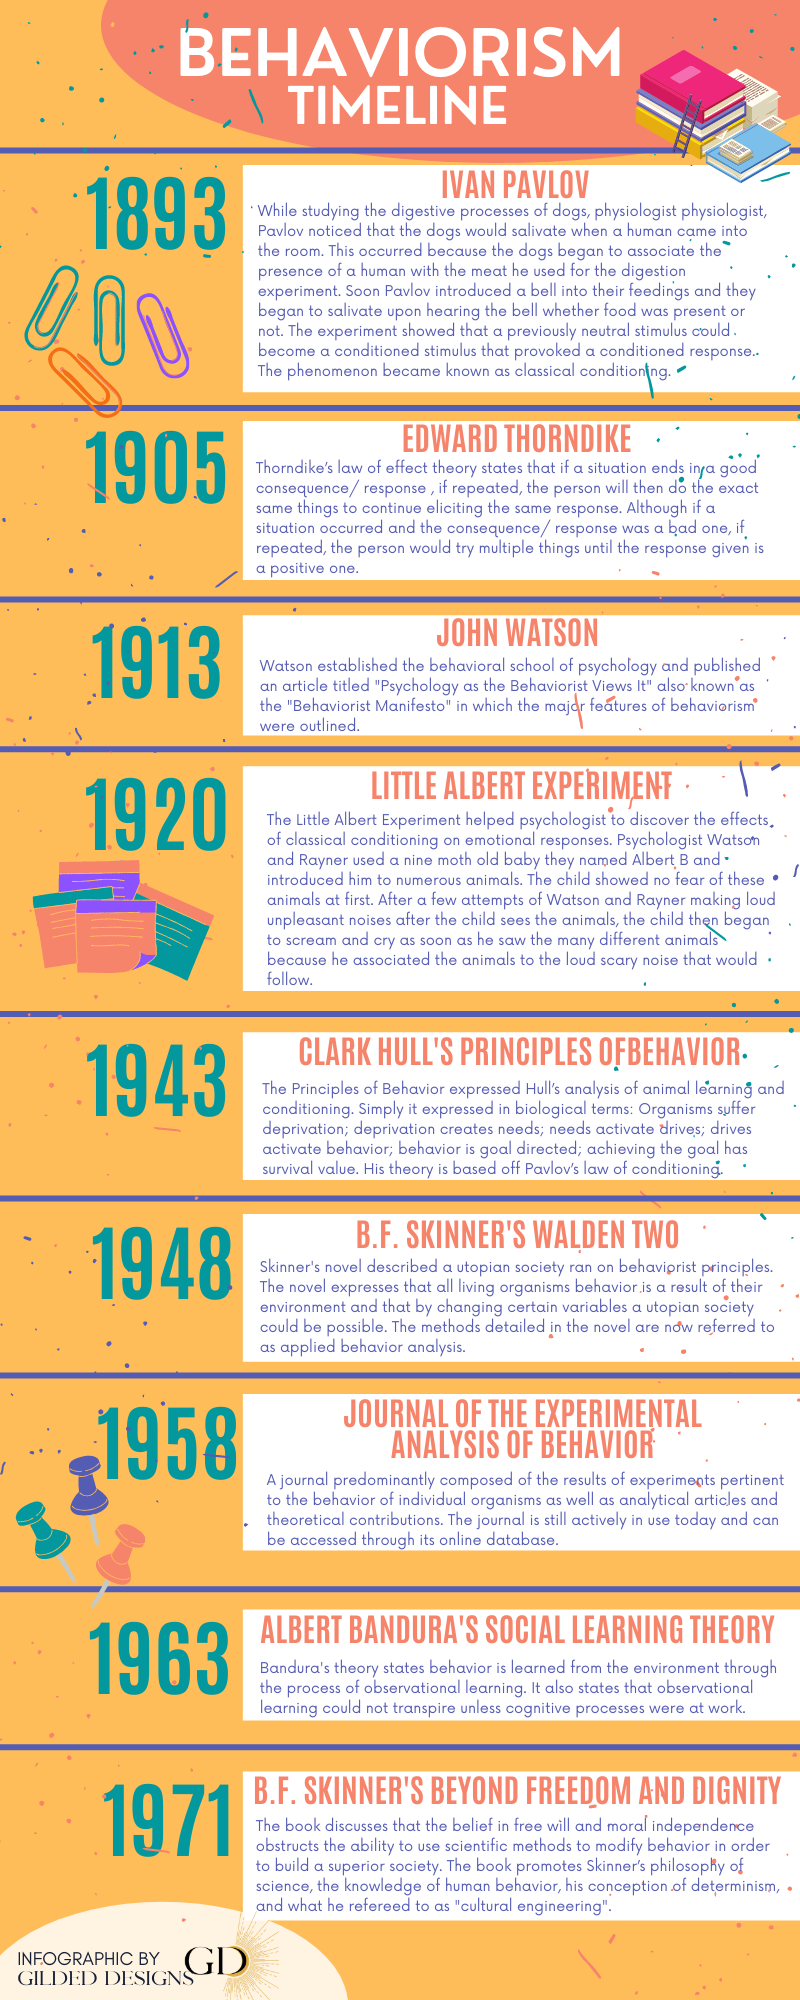 This is an infographic of a behaviorism timeline